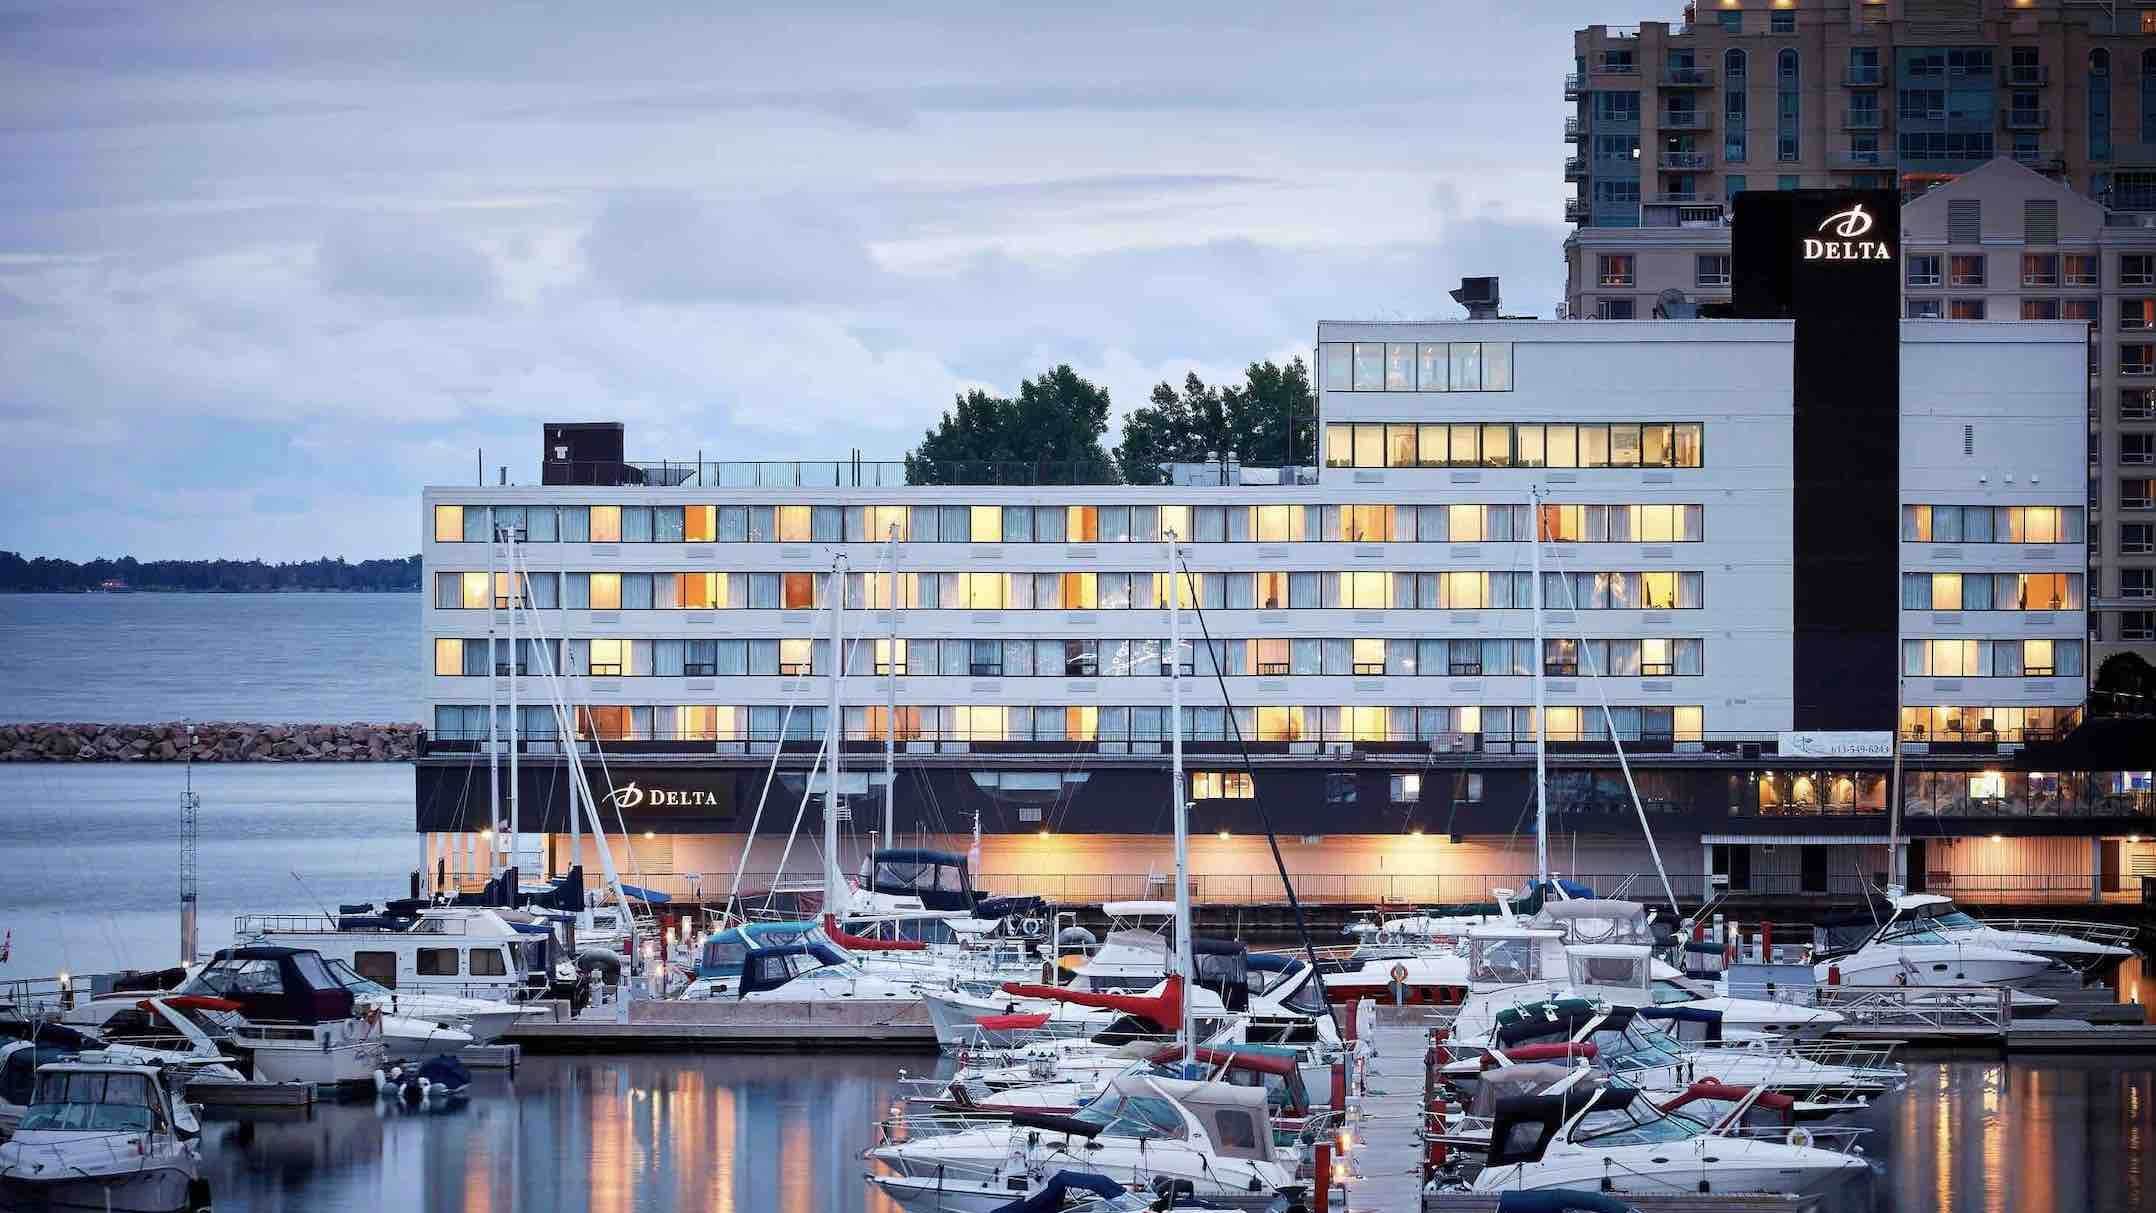 Delta Waterfront Hotel, boutique hotels in Kingston waterfront location next to lake and marina copy